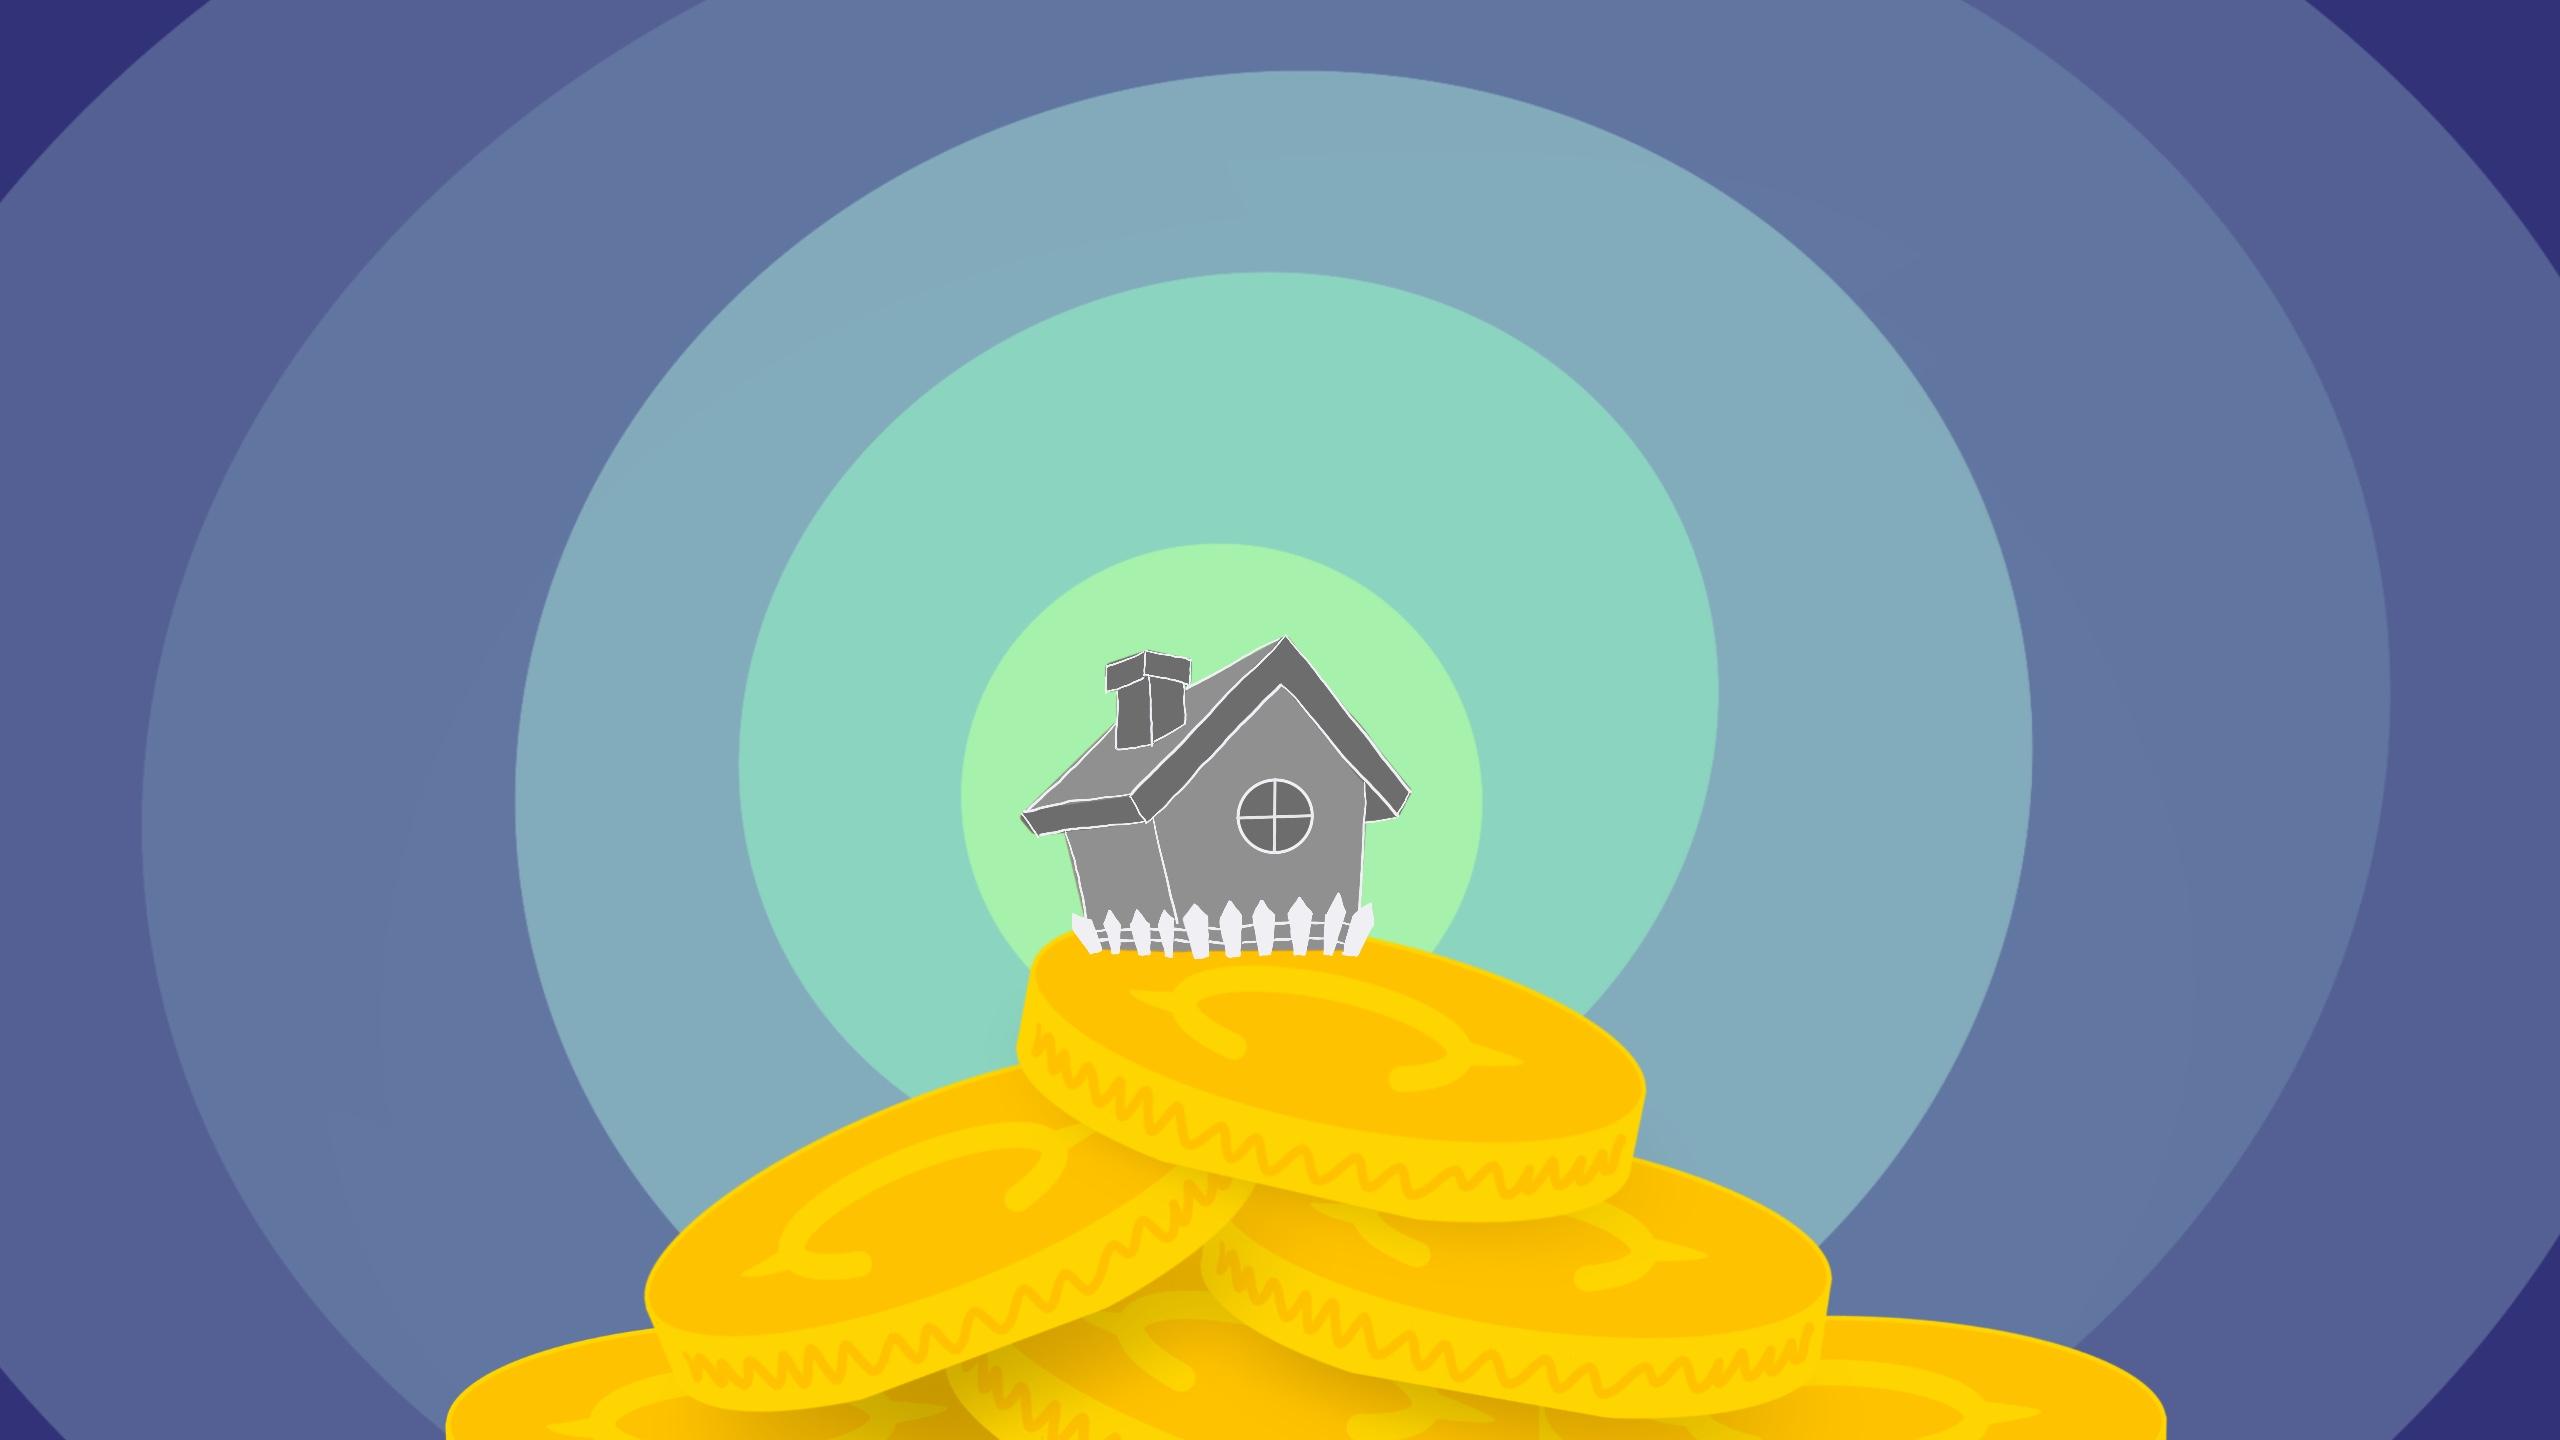 Illustration of a home on top of a pile of coins